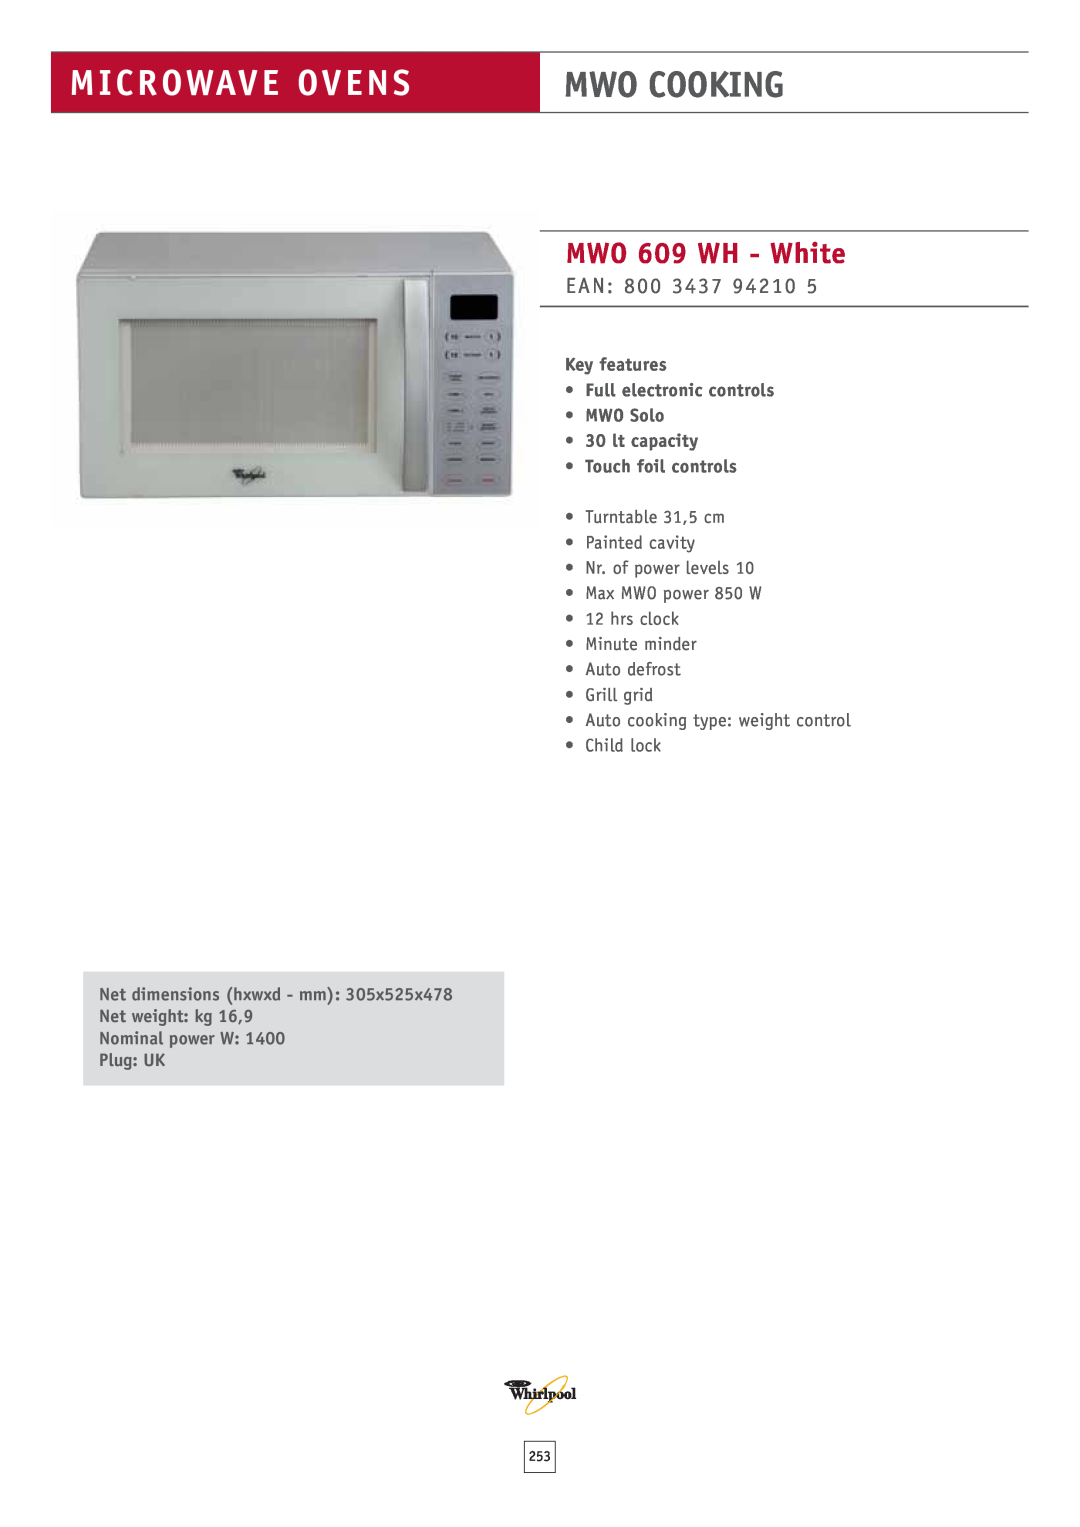 Whirlpool MWO 611 WH MWO 609 WH - White, EAN 800, Key features Full electronic controls, Microwave Ovens, Mwo Cooking 